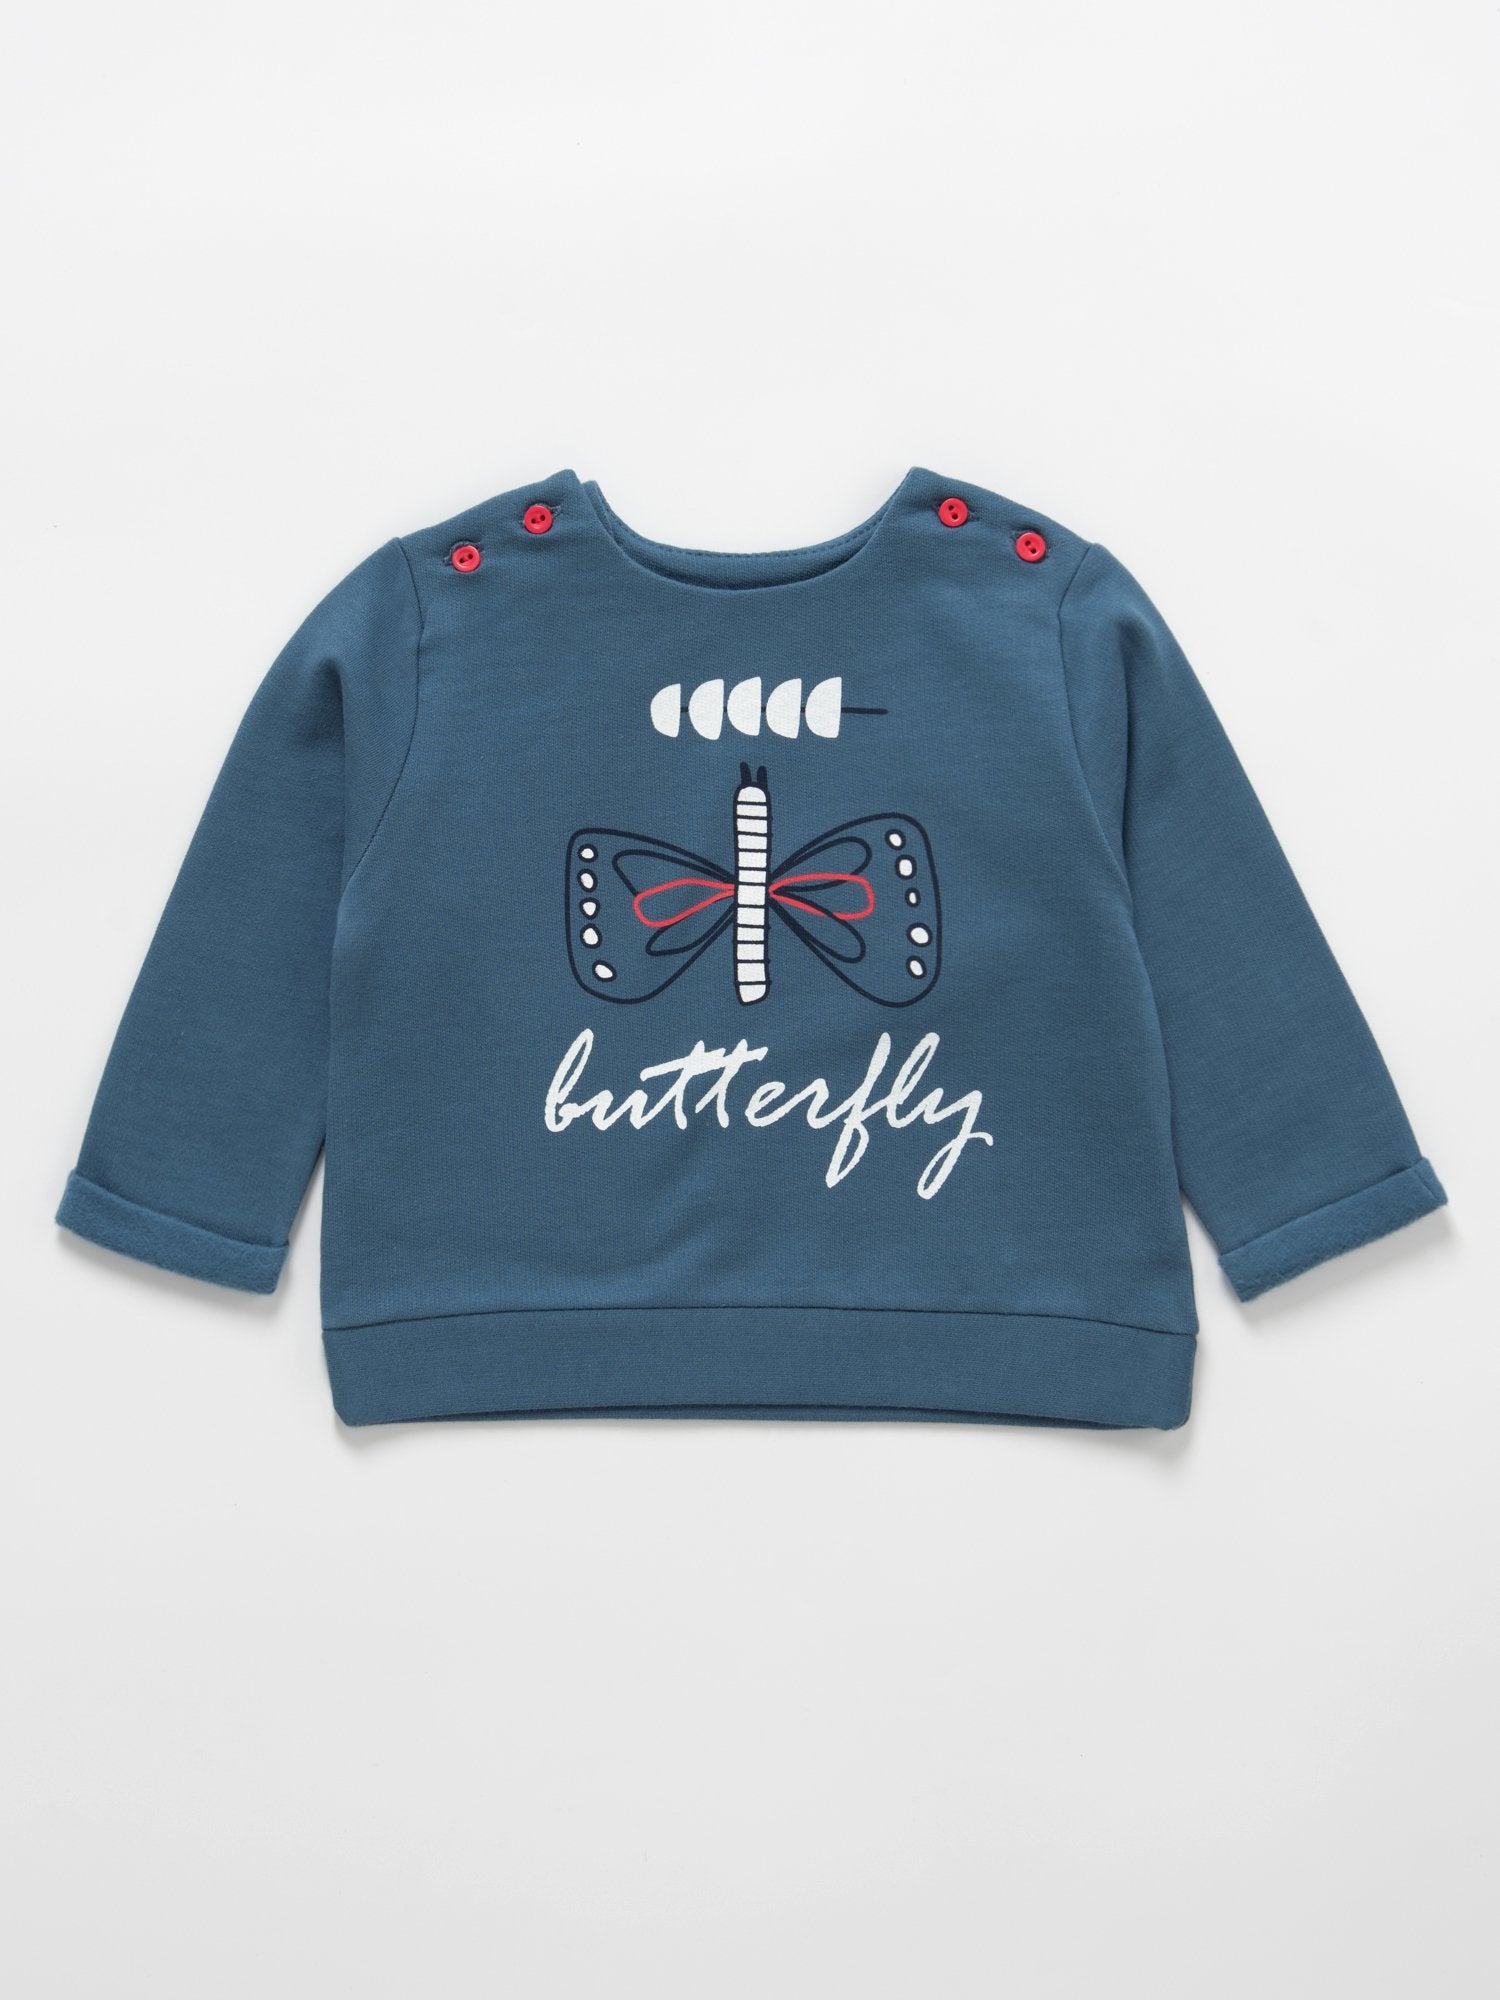 Artie - My Little Butterfly - Blue French Terry Baby Jumper 3-9 months - Stylemykid.com